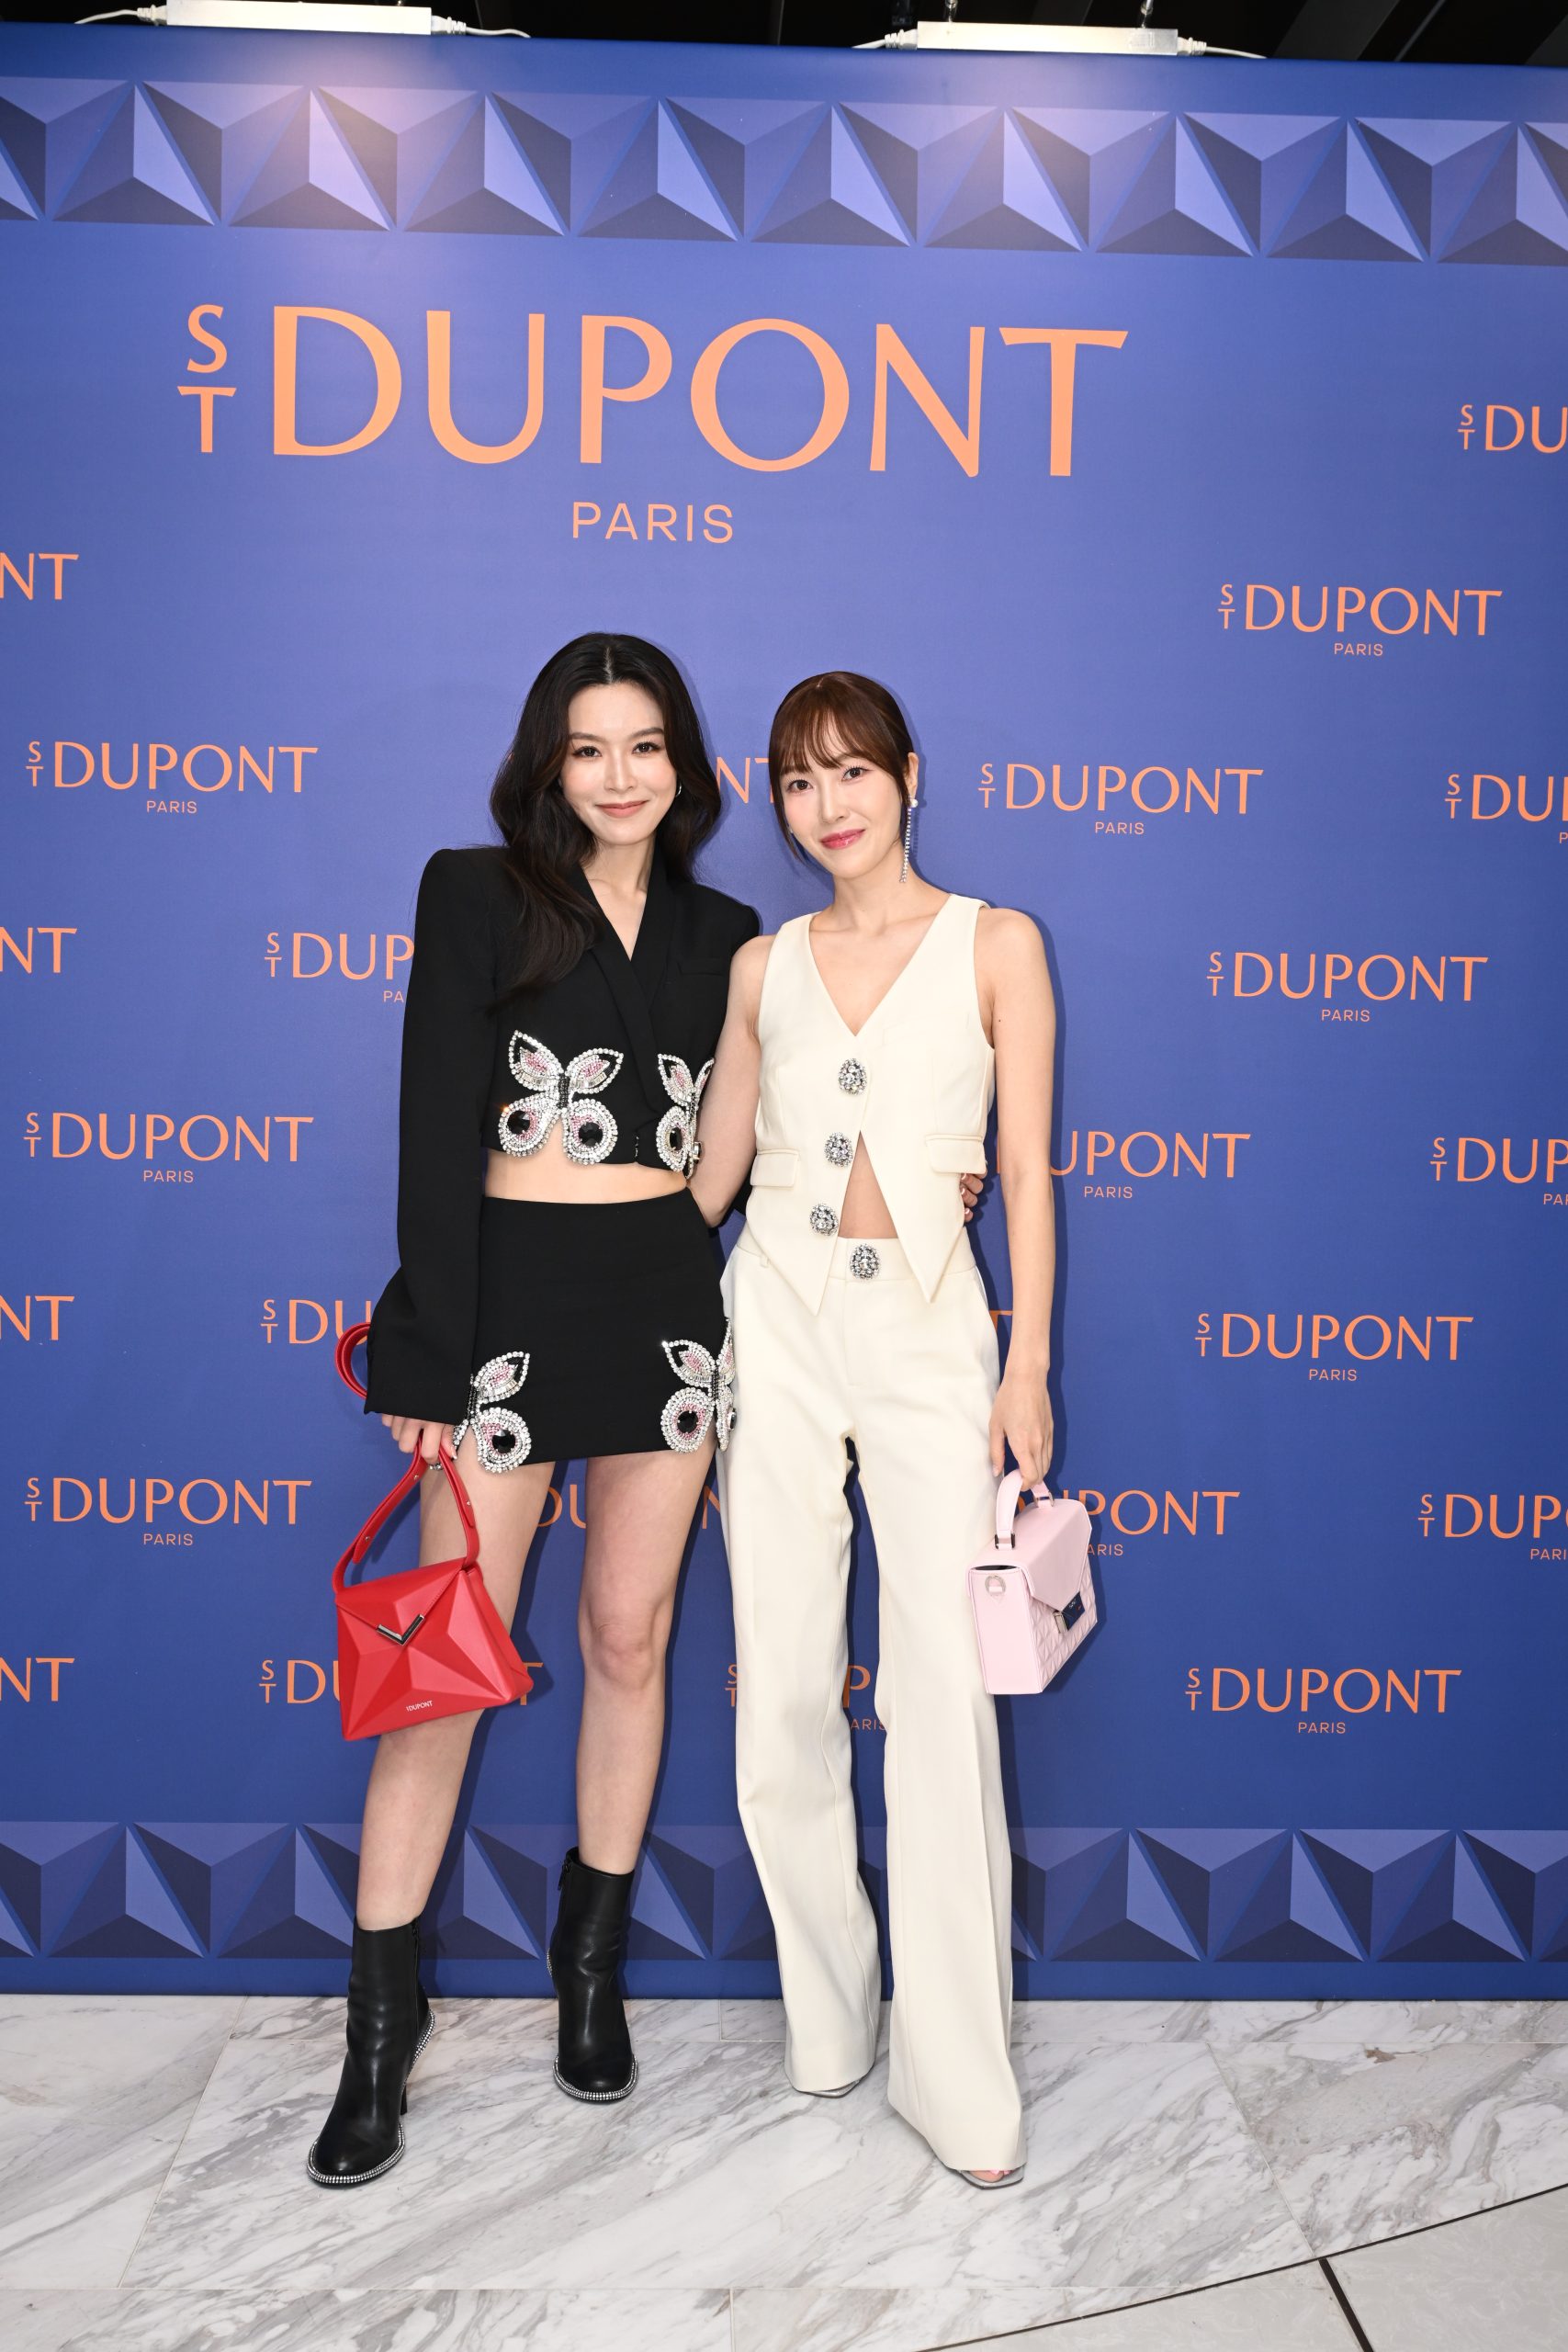 S.T. DUPONT Store Opening